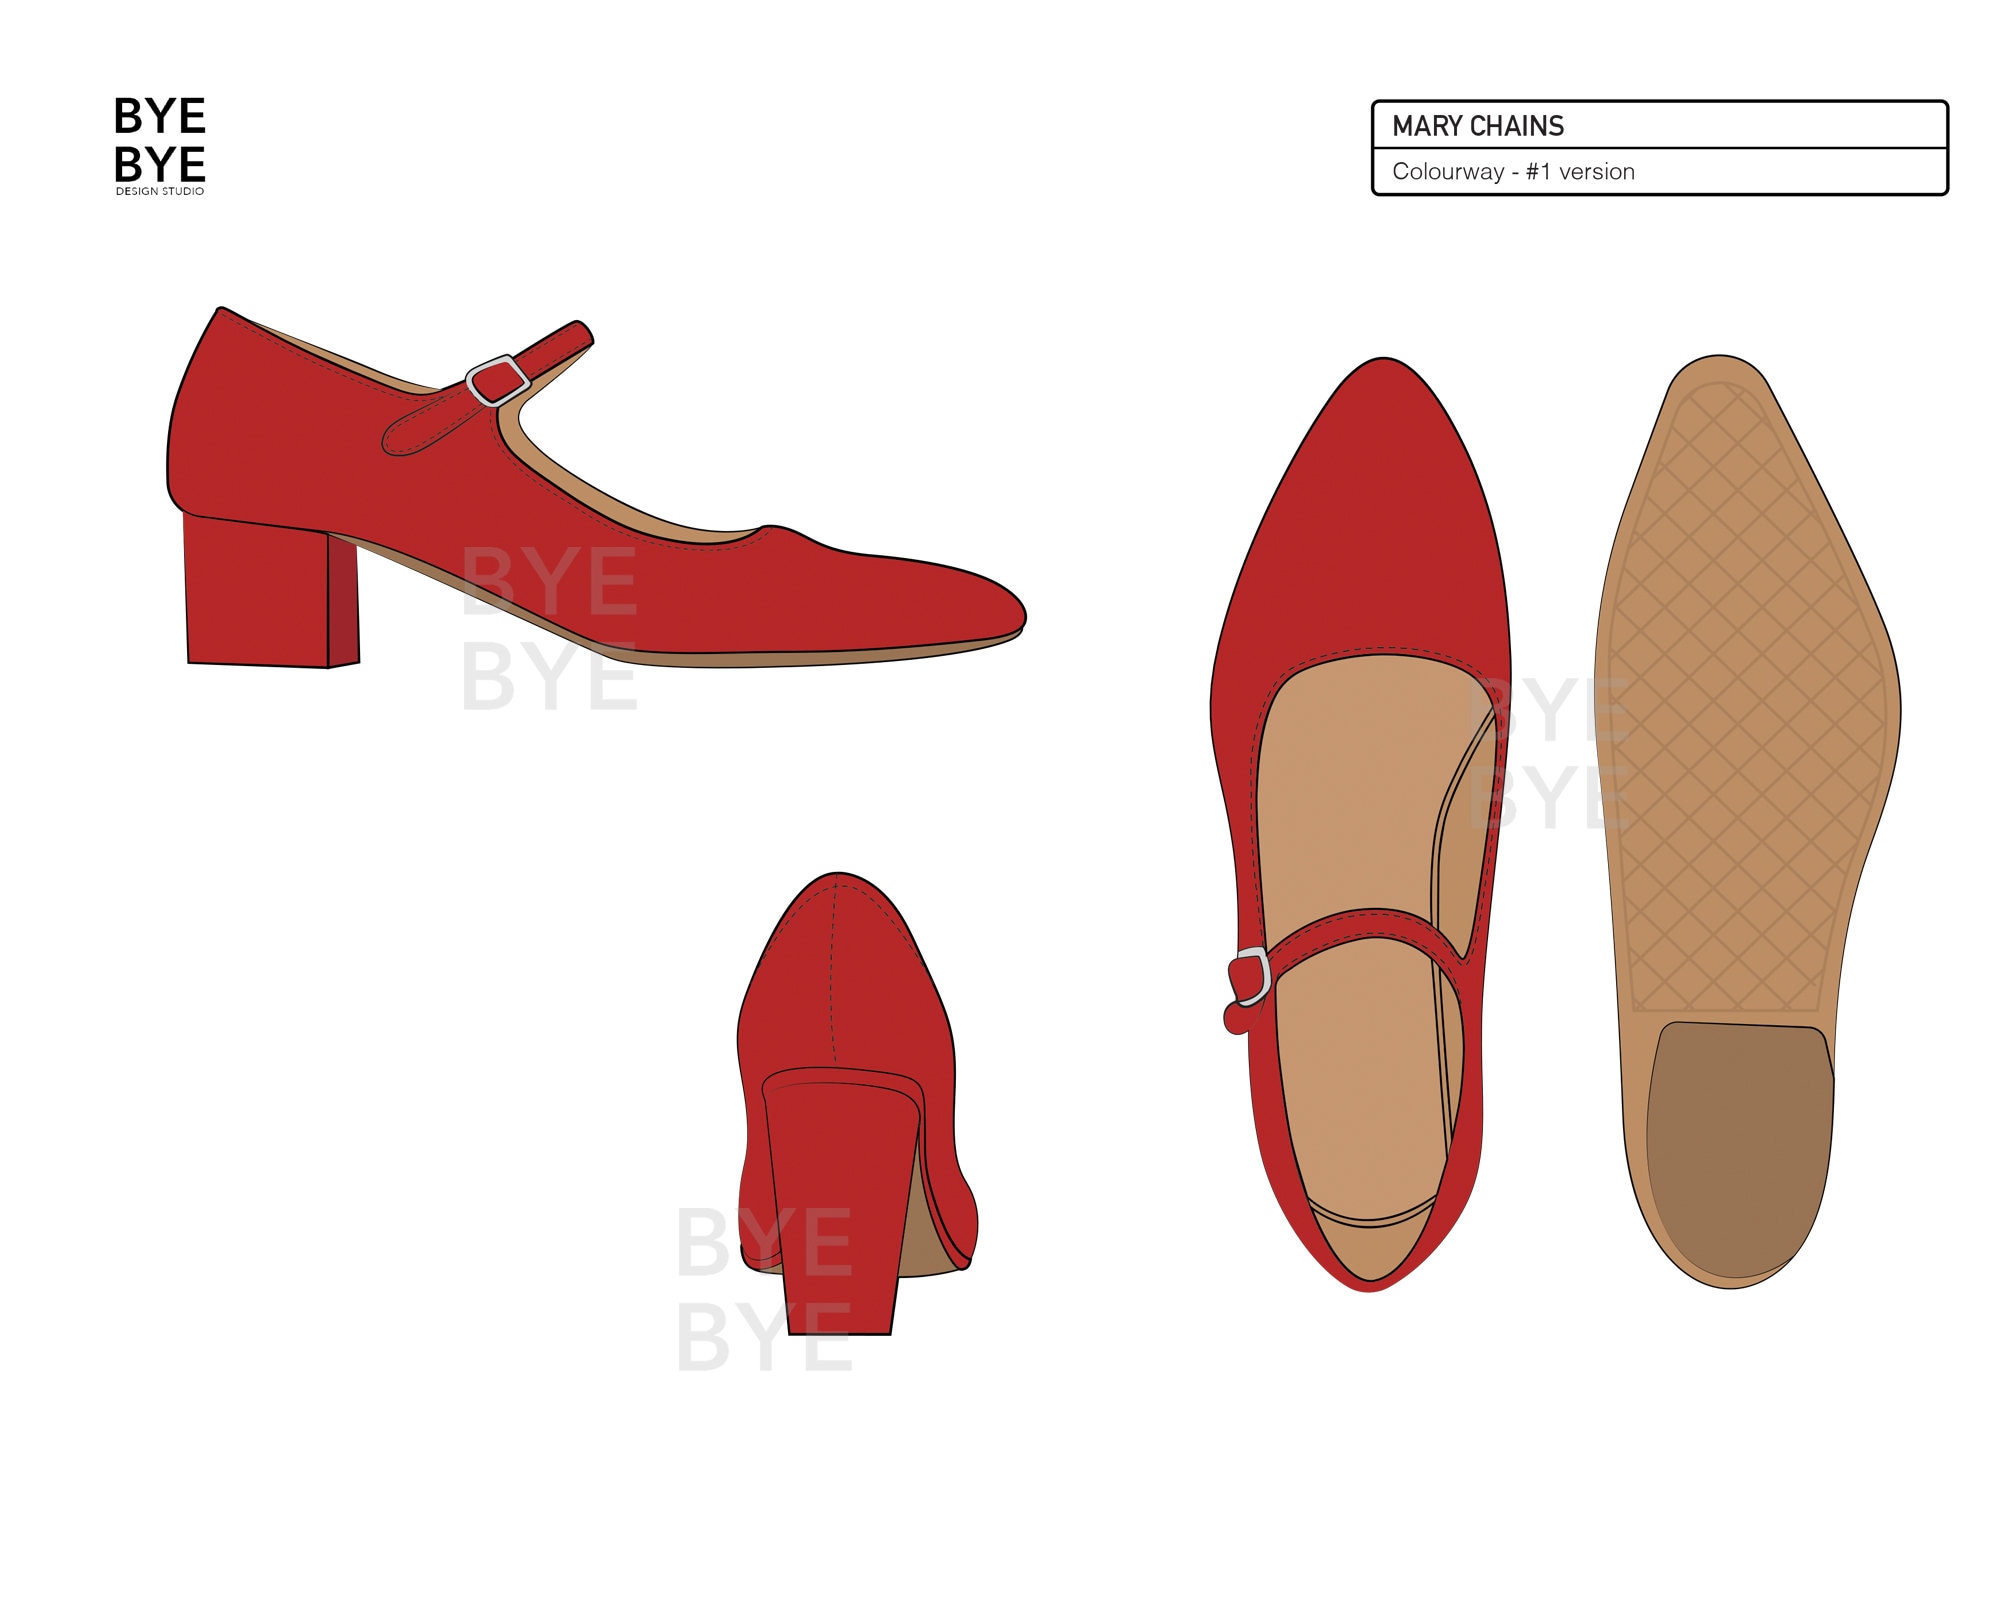 MARY CHAINS Shoes Fashion Design Flat Sketches to Download - Etsy UK